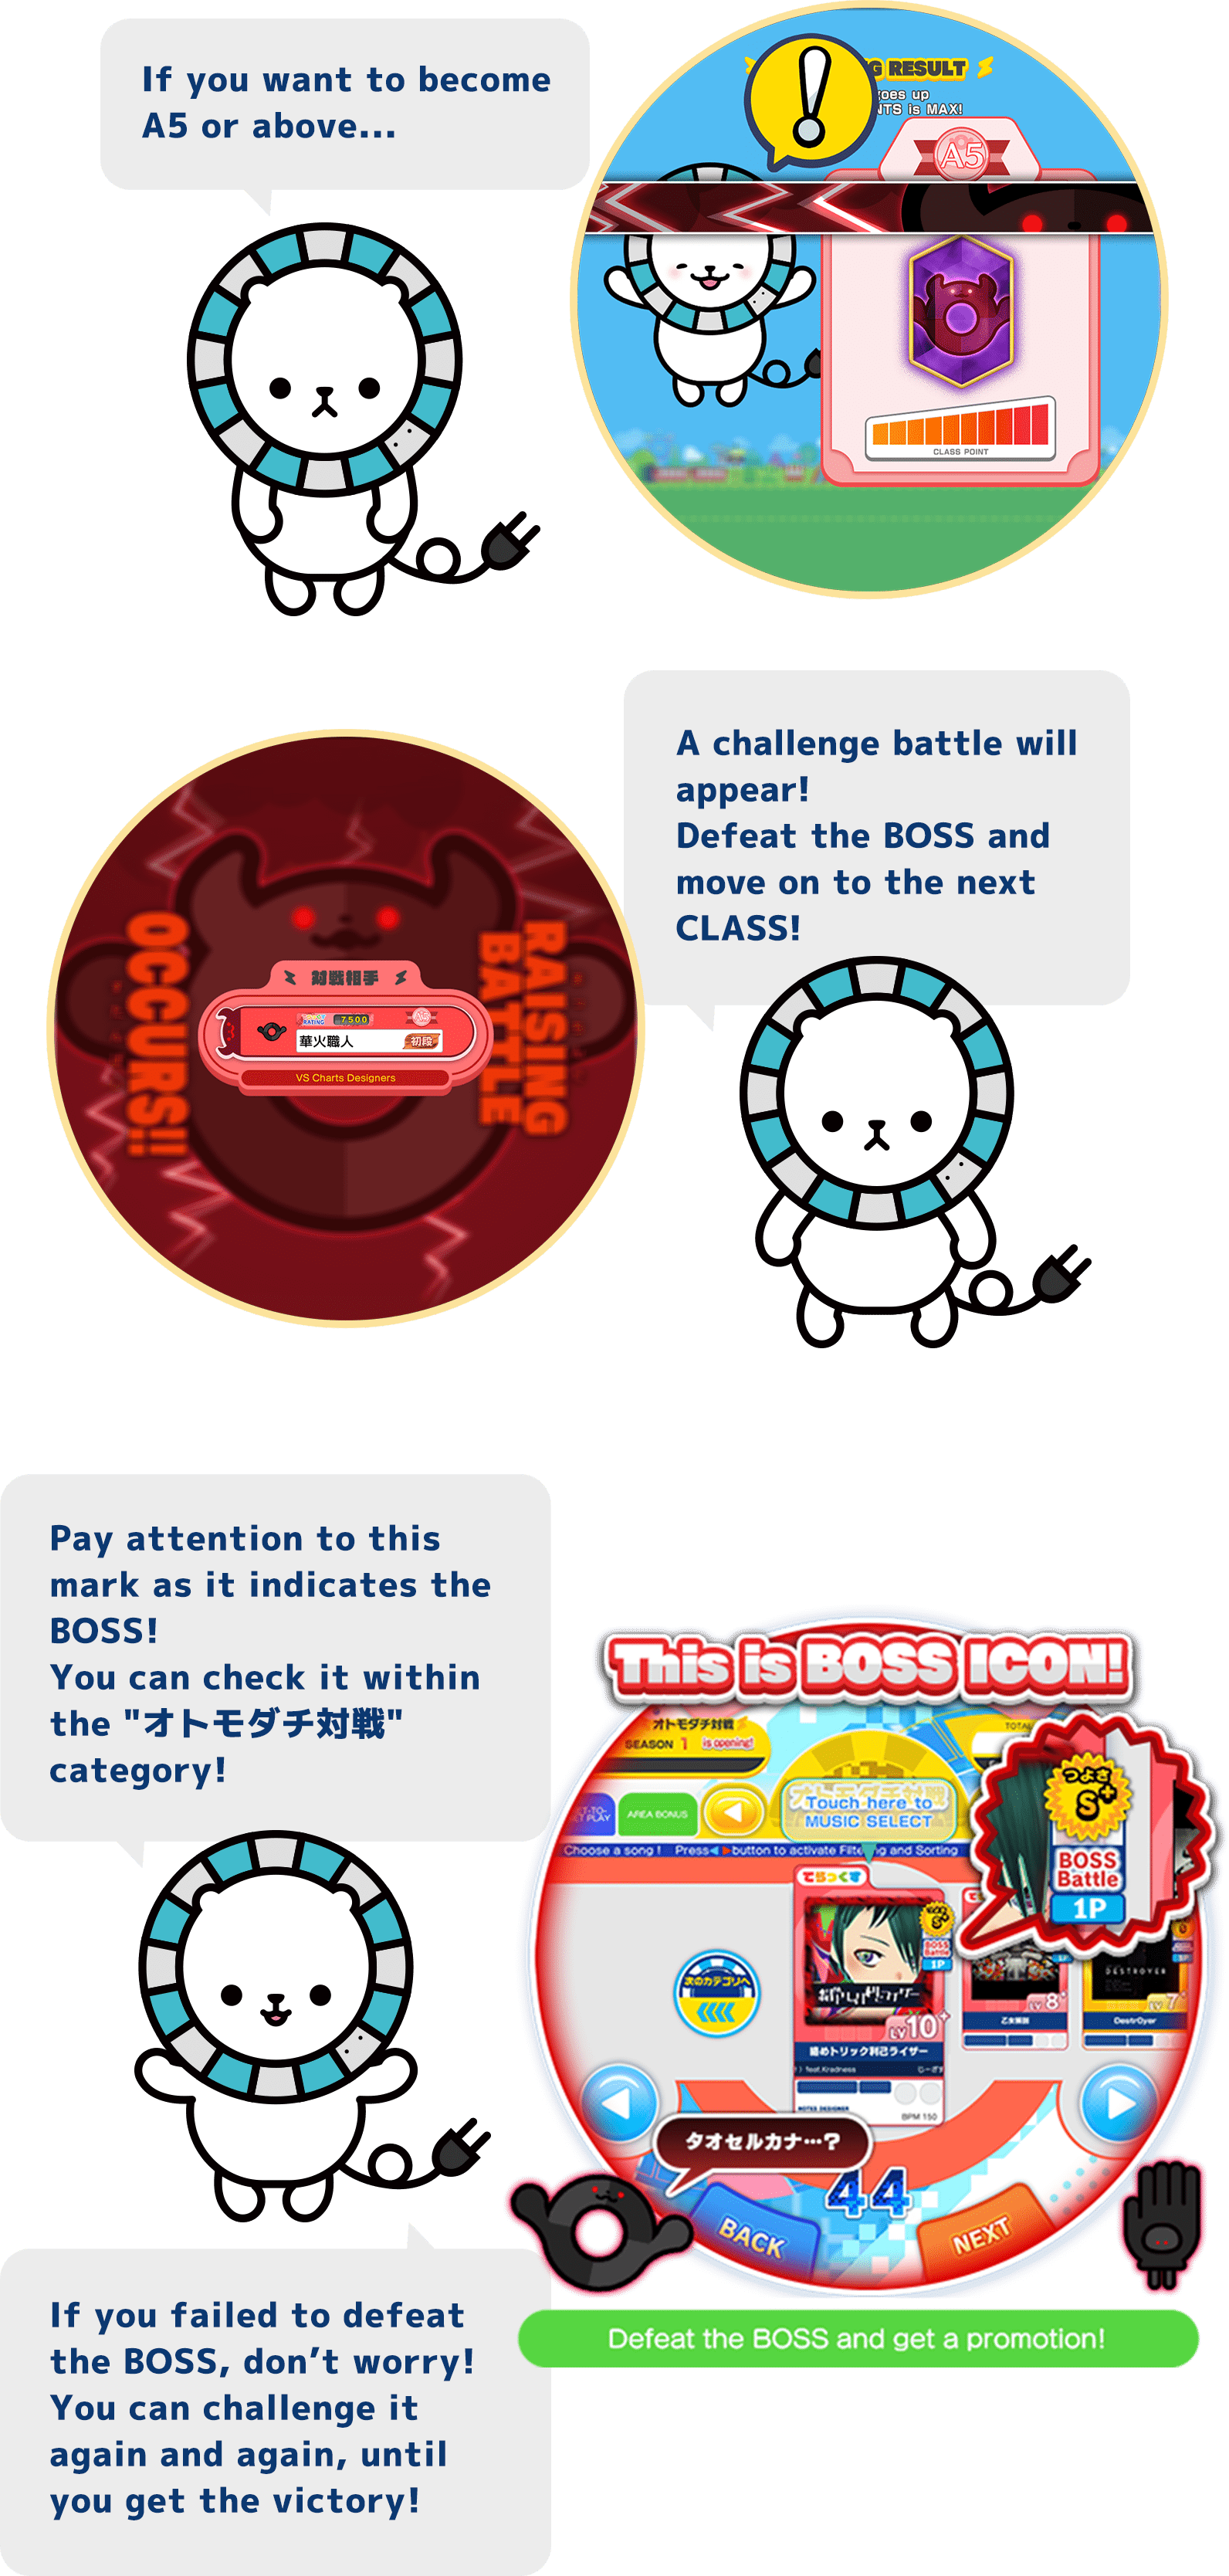 If you want to become
          A5 or above...
          A challenge battle will appear!
          Defeat the BOSS and
          move on to the next CLASS!
          Pay attention to this mark as it indicates the BOSS!
          You can check it within the "オトモダチ対戦" category!
          If you failed to defeat the BOSS, don’t worry!
          You can challenge it again and again, until you get the victory!